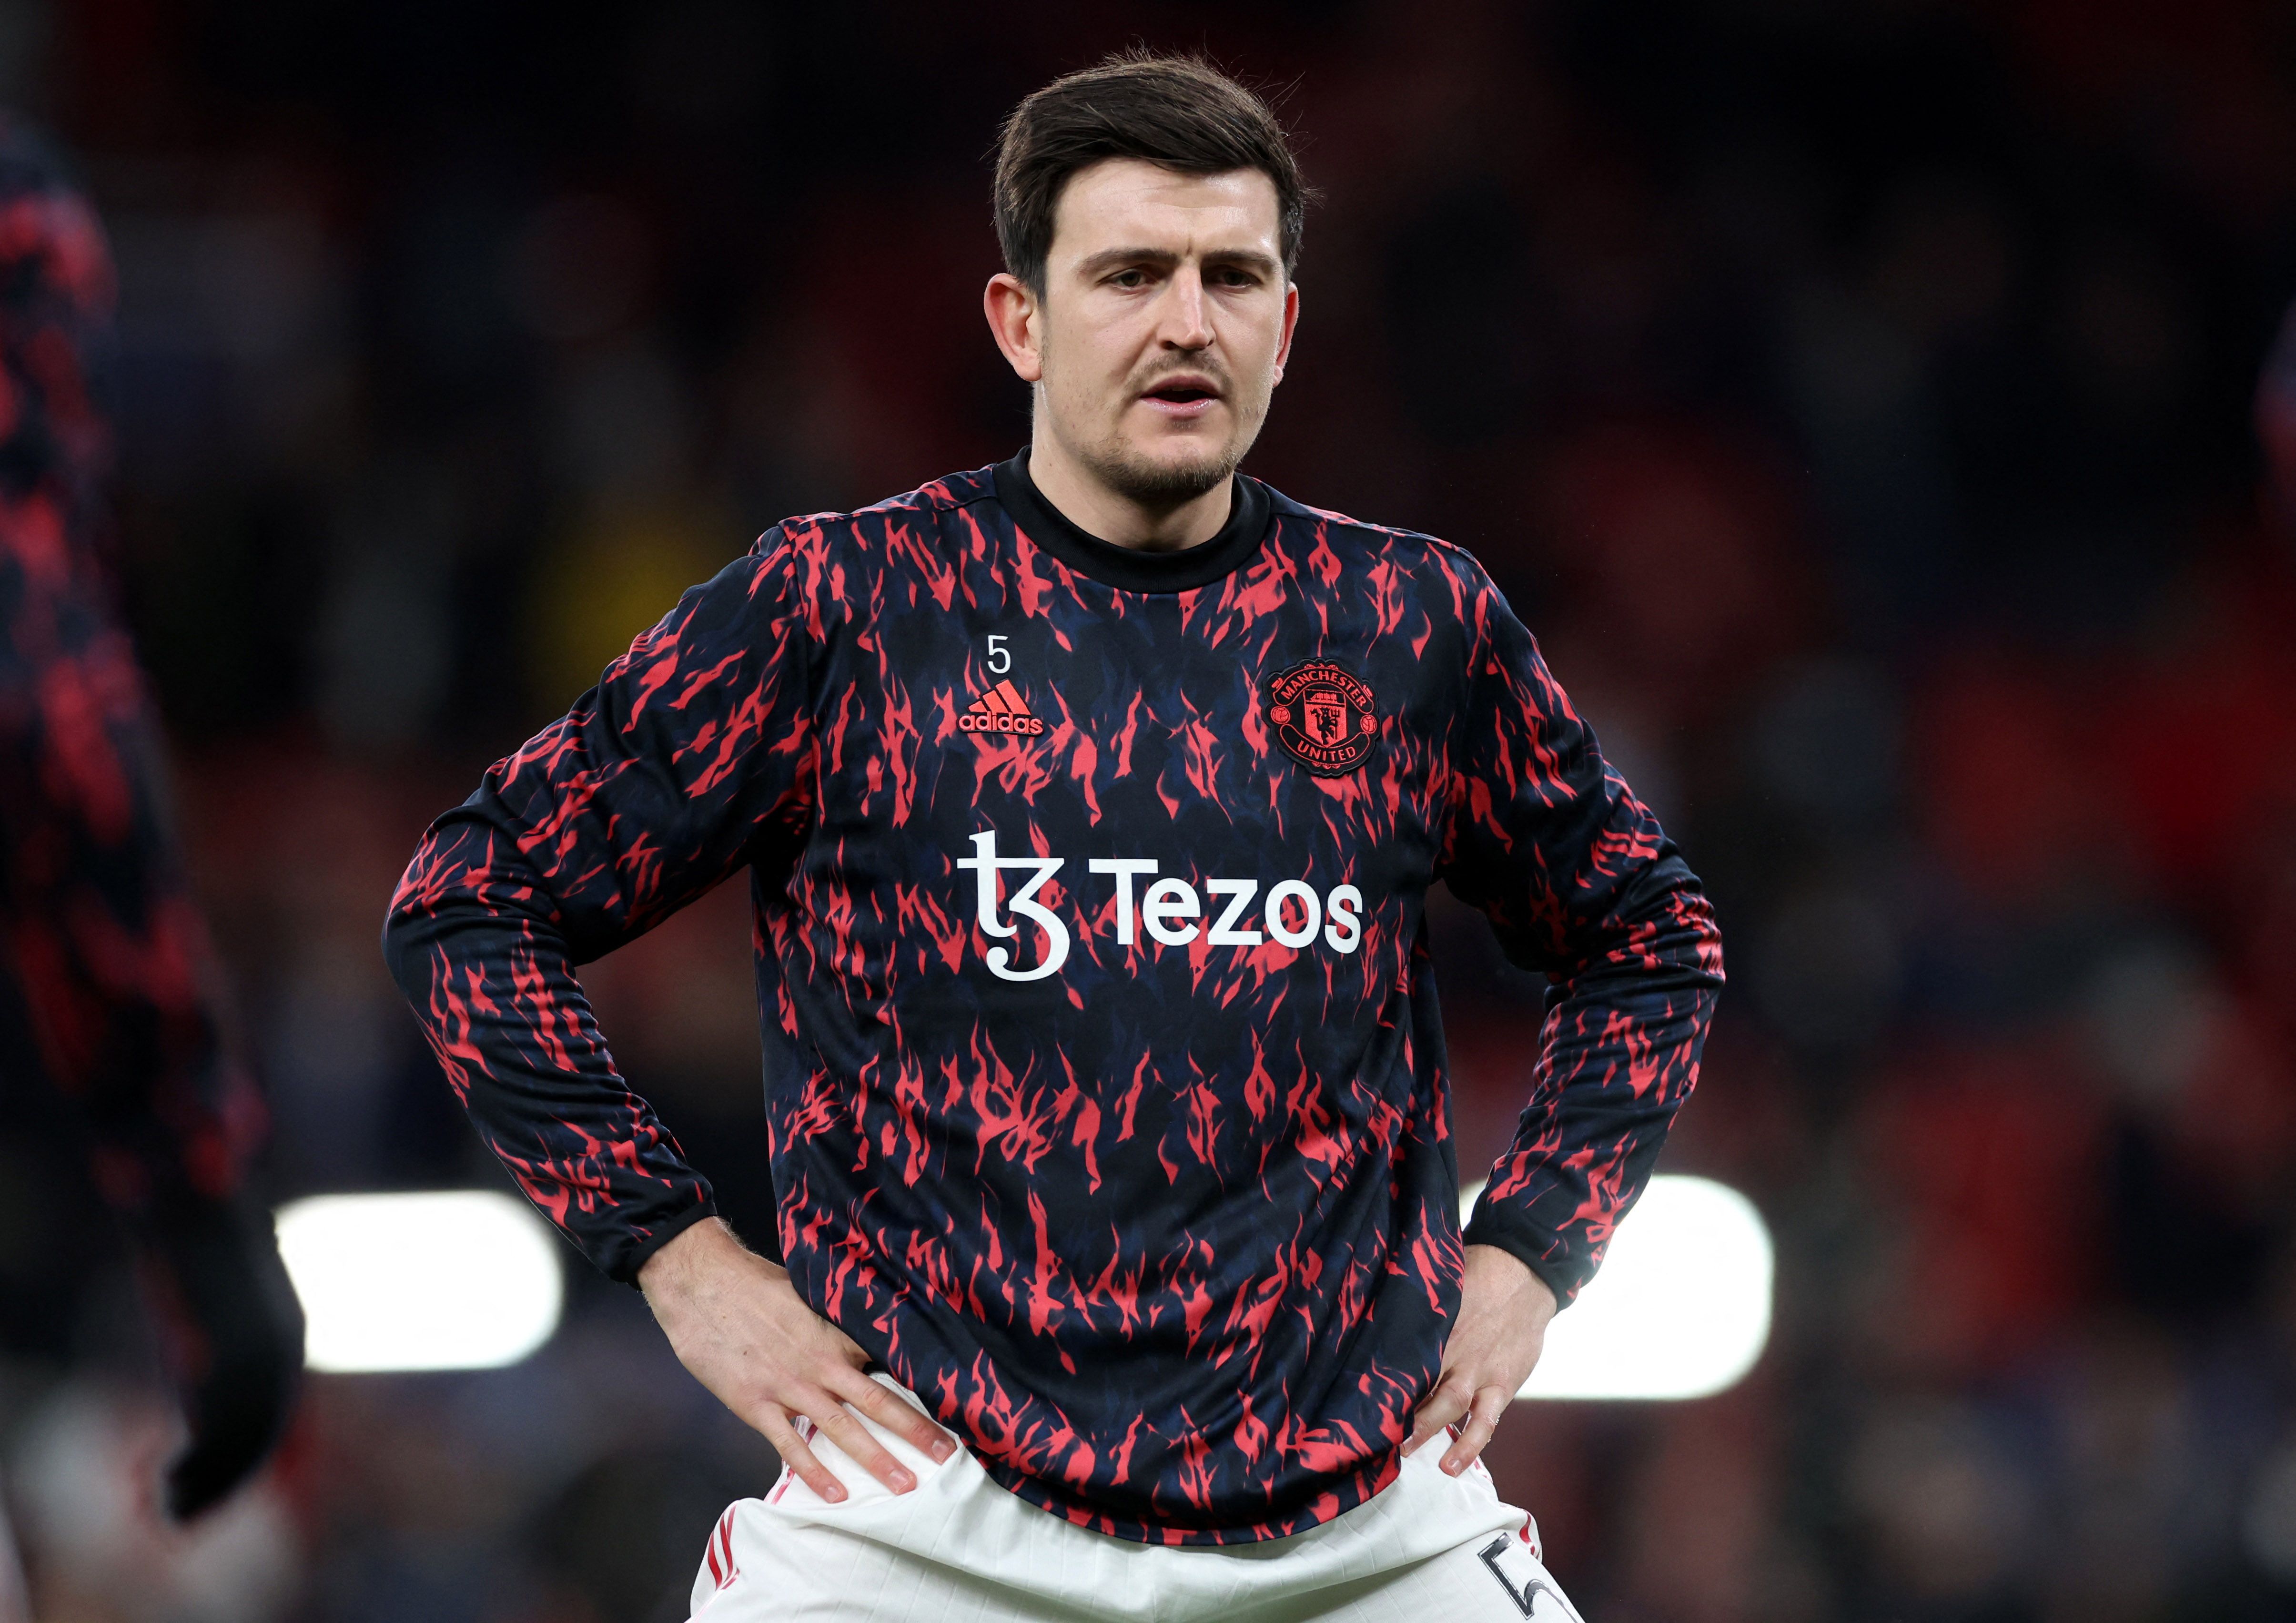 Man Utd's Maguire at Old Trafford.